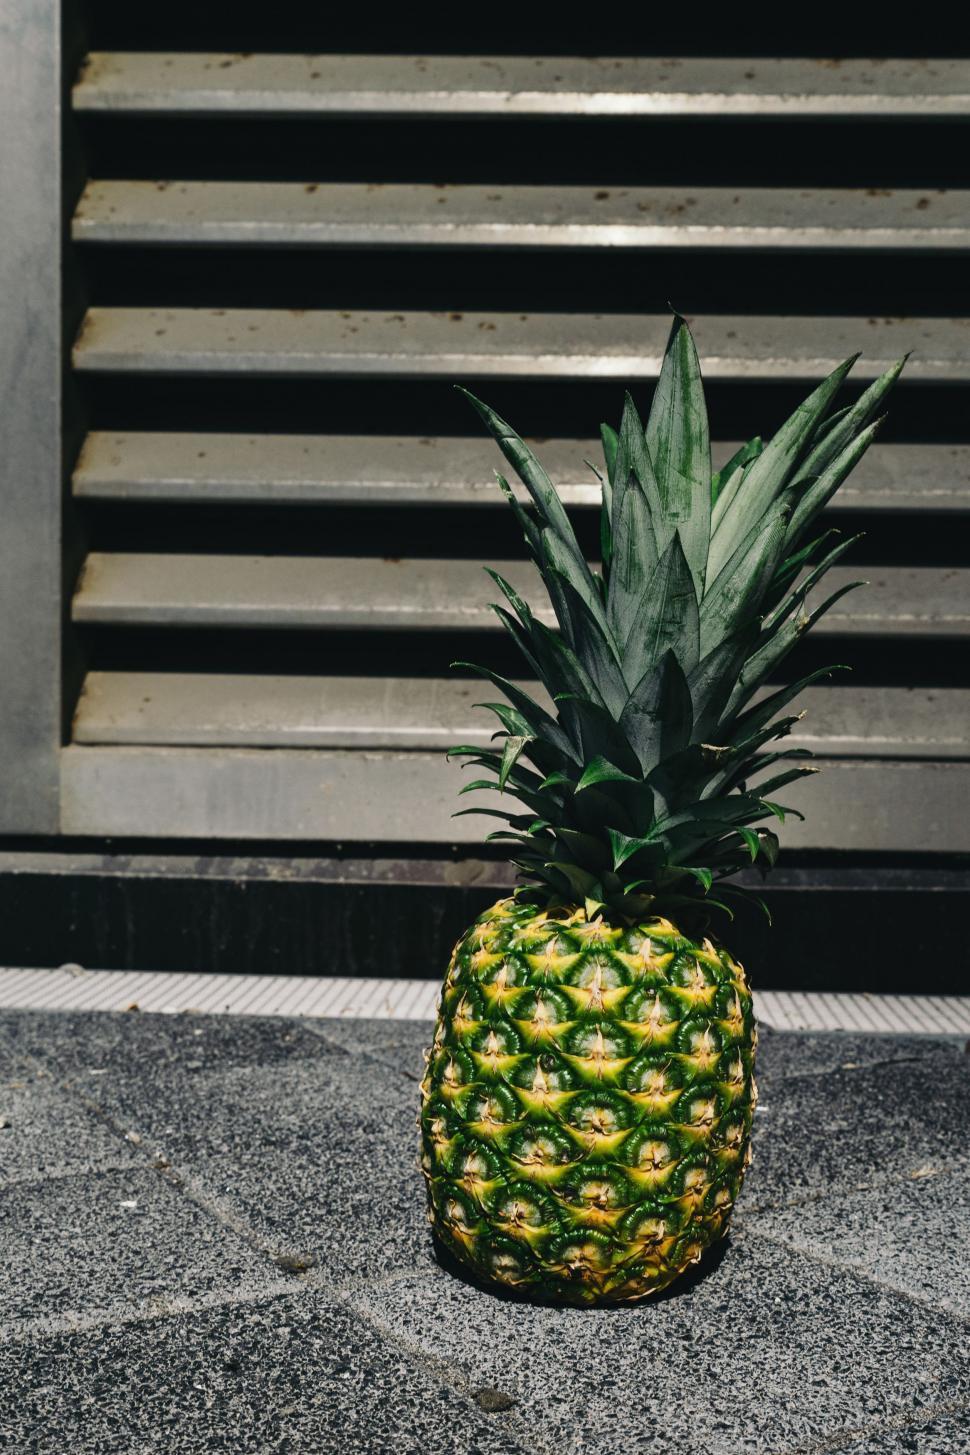 Free Image of Pineapple on the pavement  